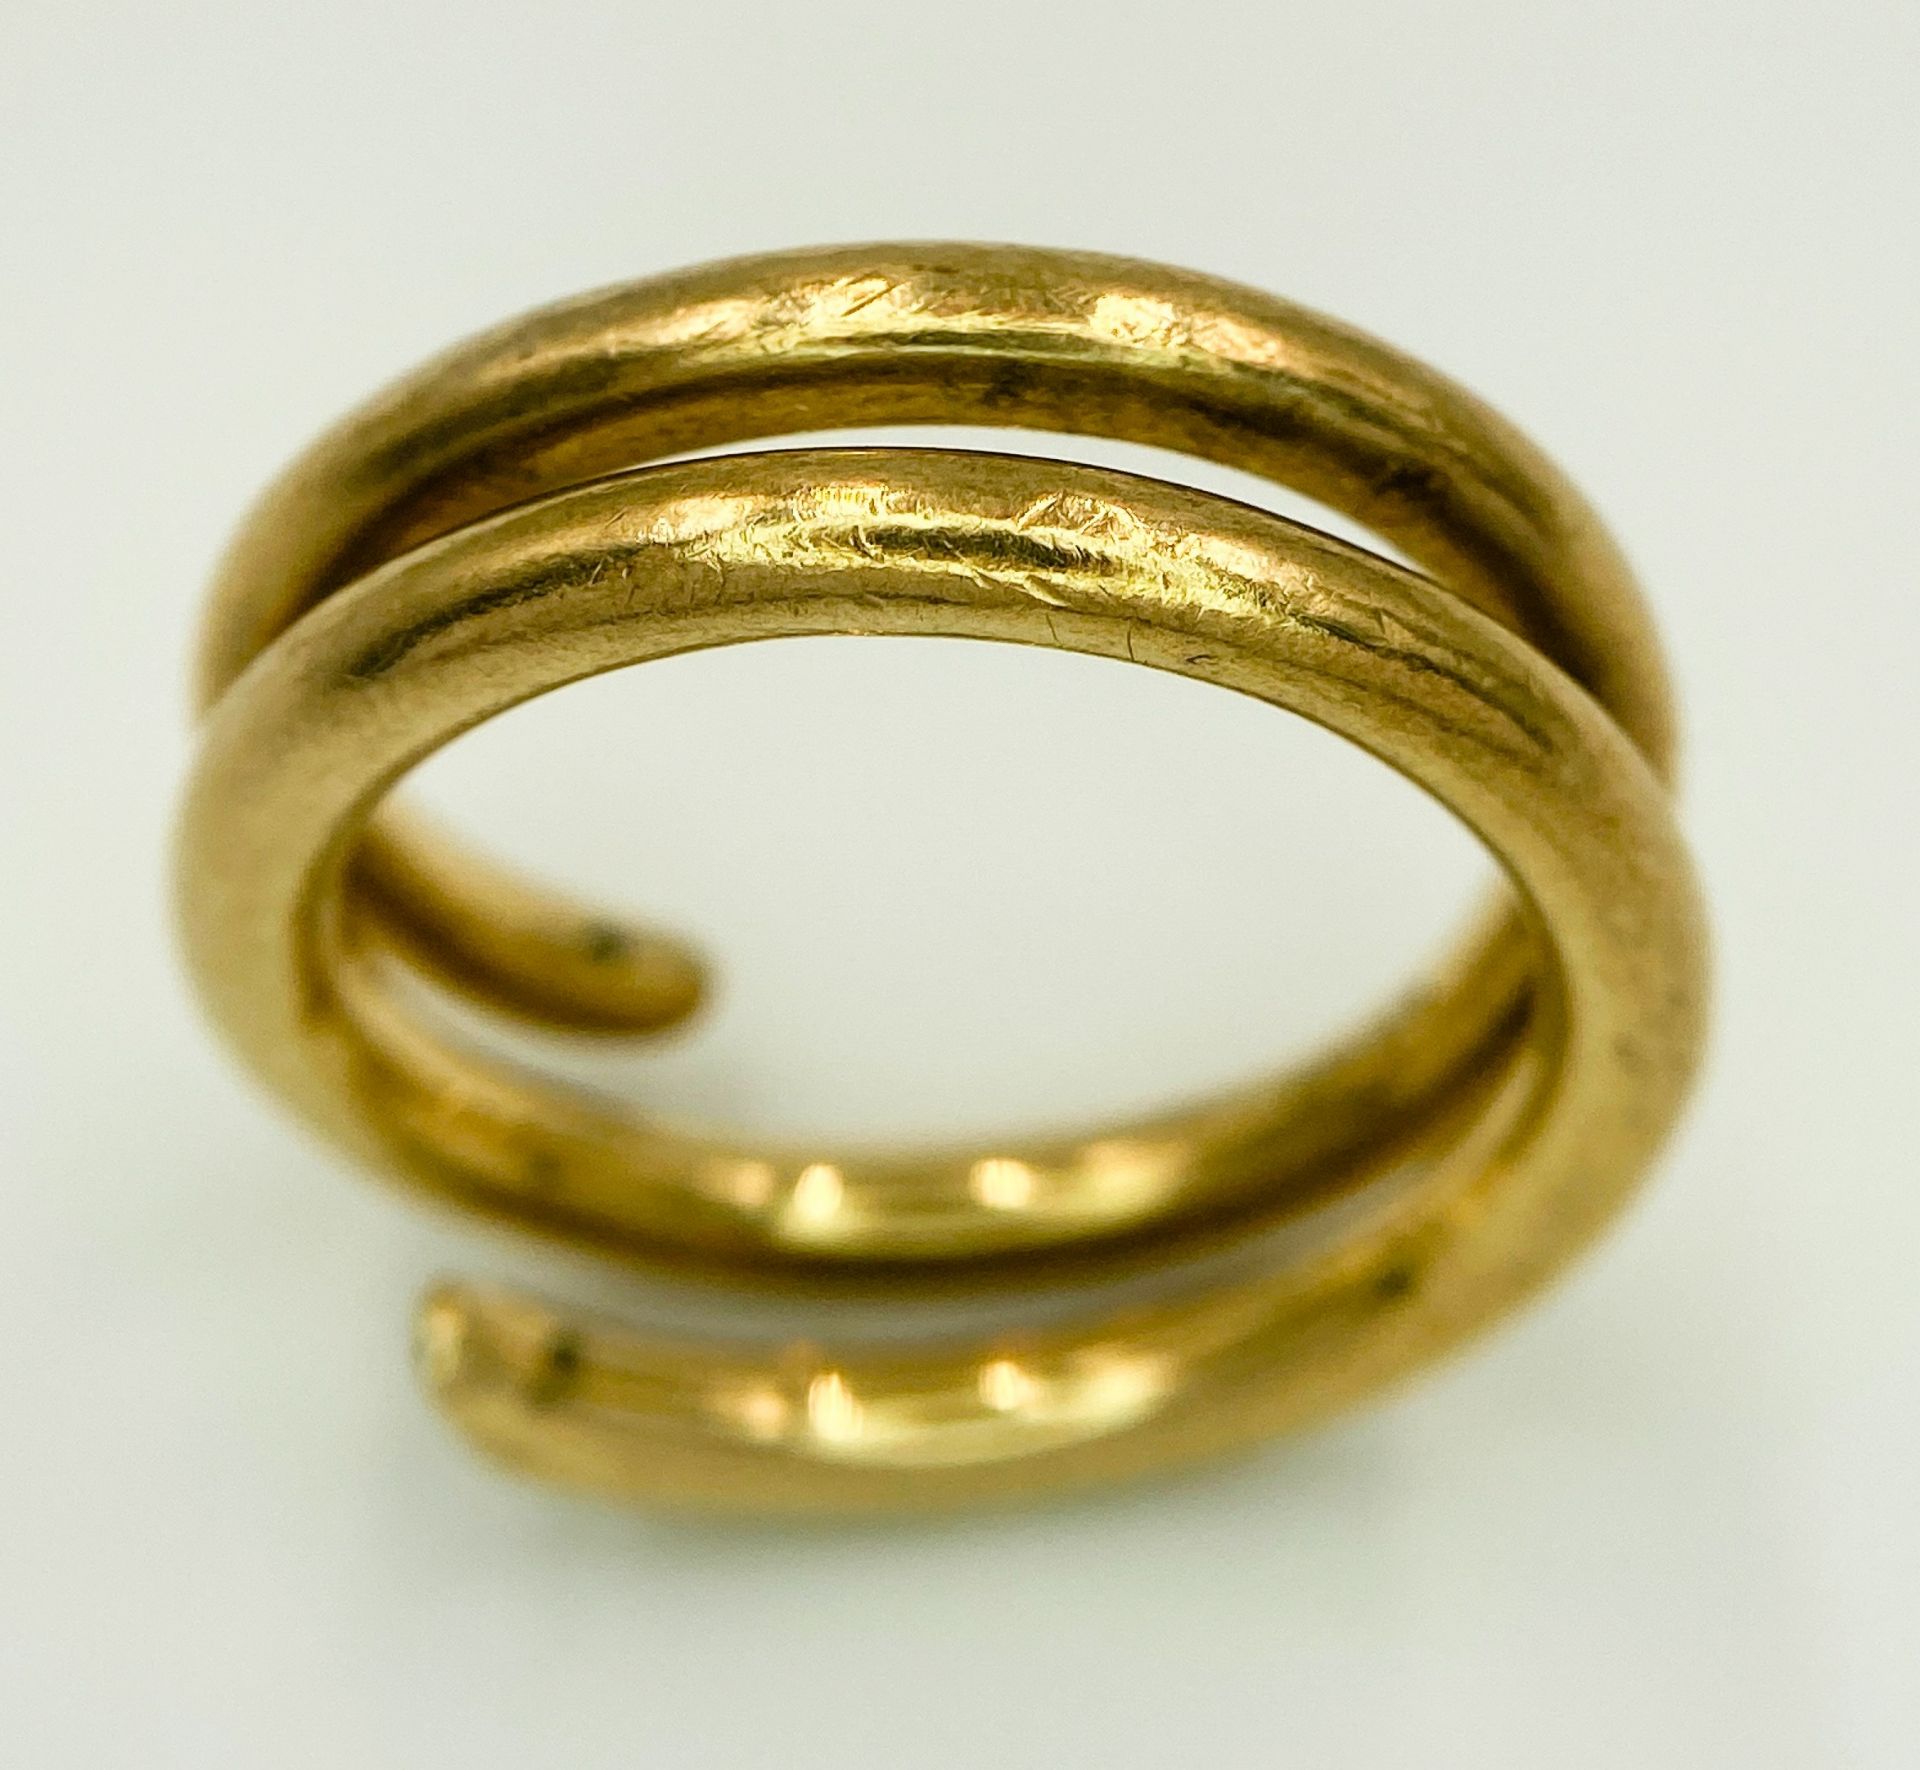 A 9K YELLOW GOLD, SERPENT STYLE DIAMOND BAND RING. 10G. SIZE T. - Image 2 of 6